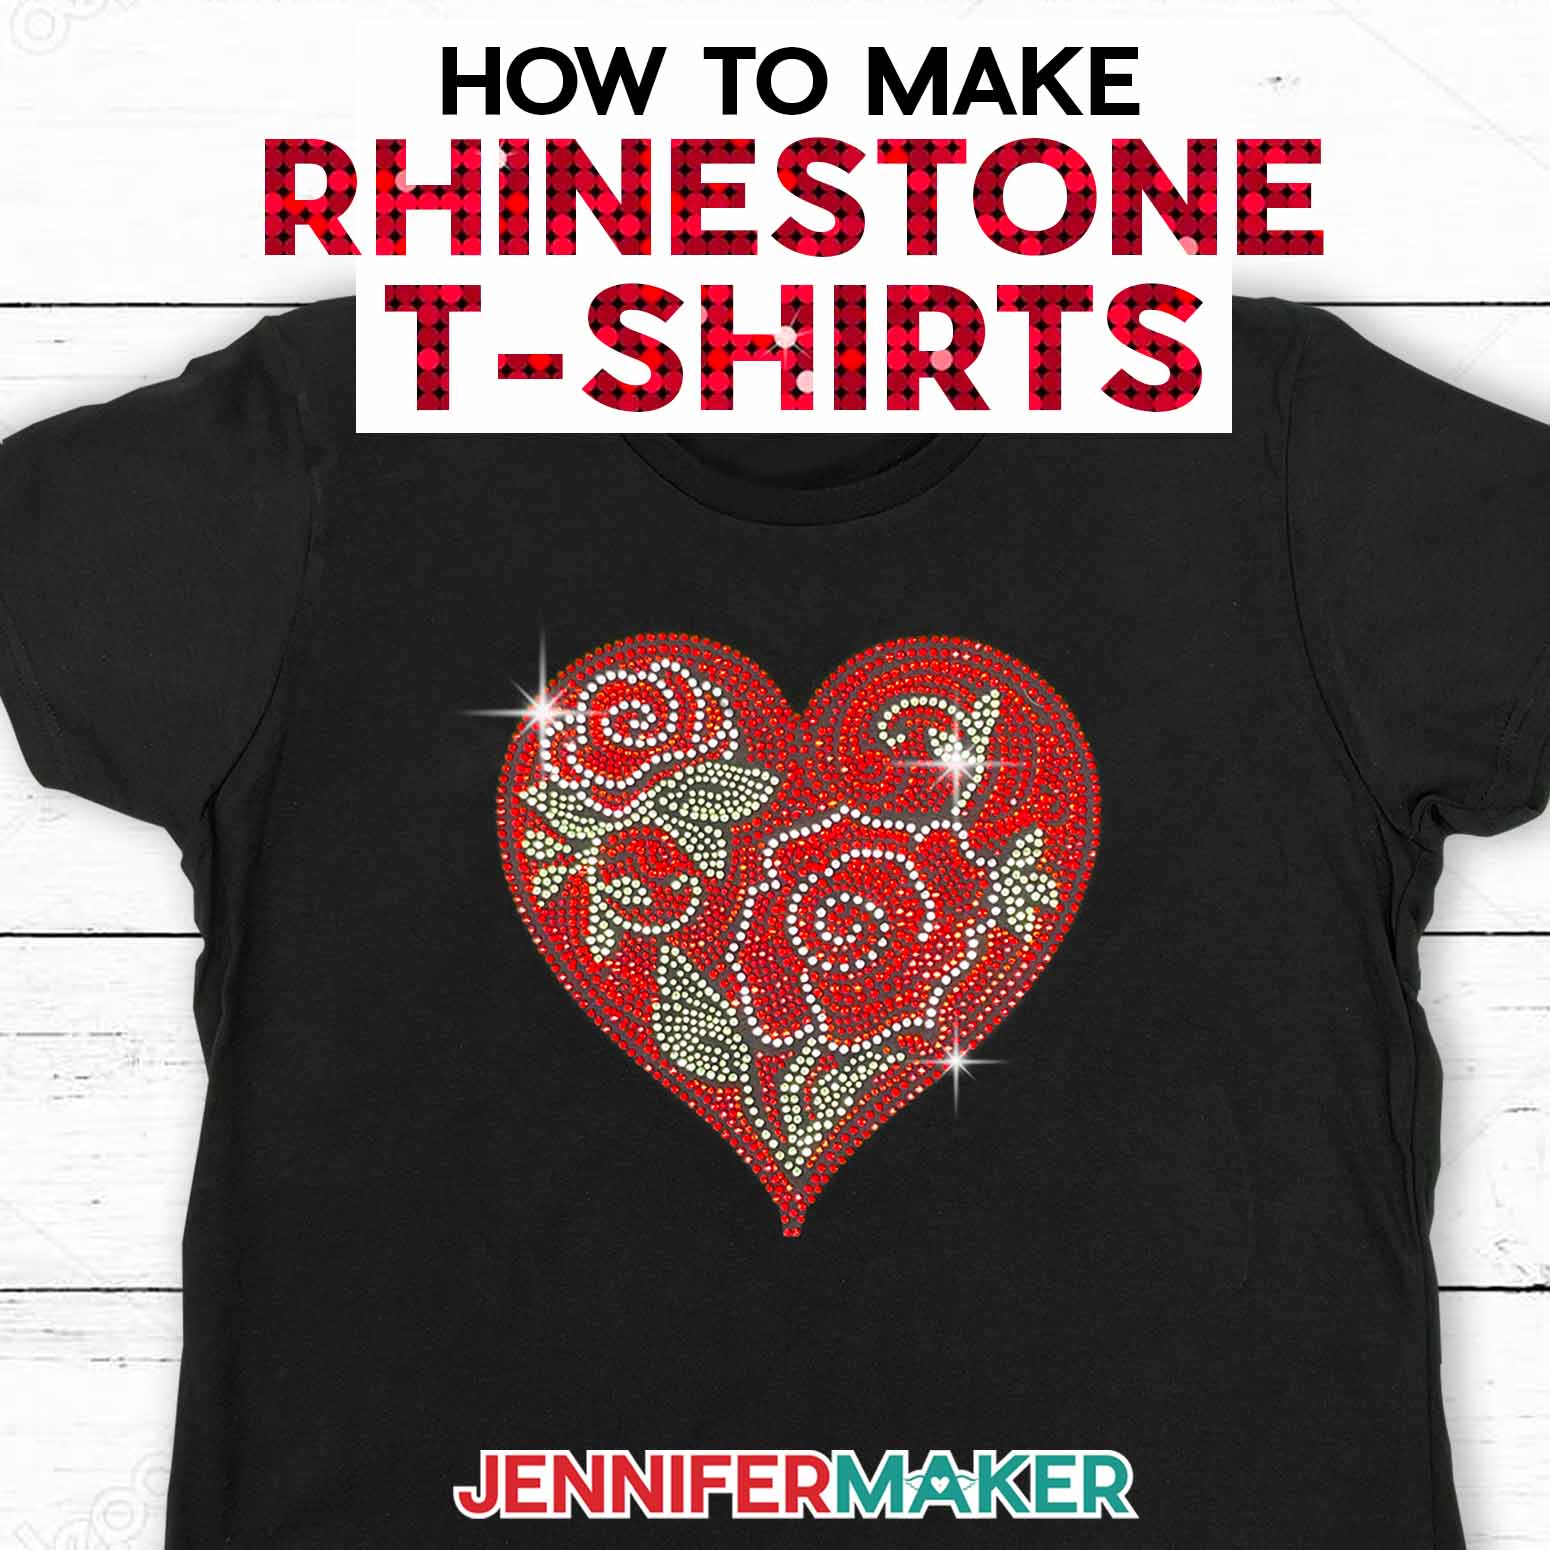 Black t-shirt with a dazzling rhinestone heart and flowers design done in red, green, and clear rhinestones.